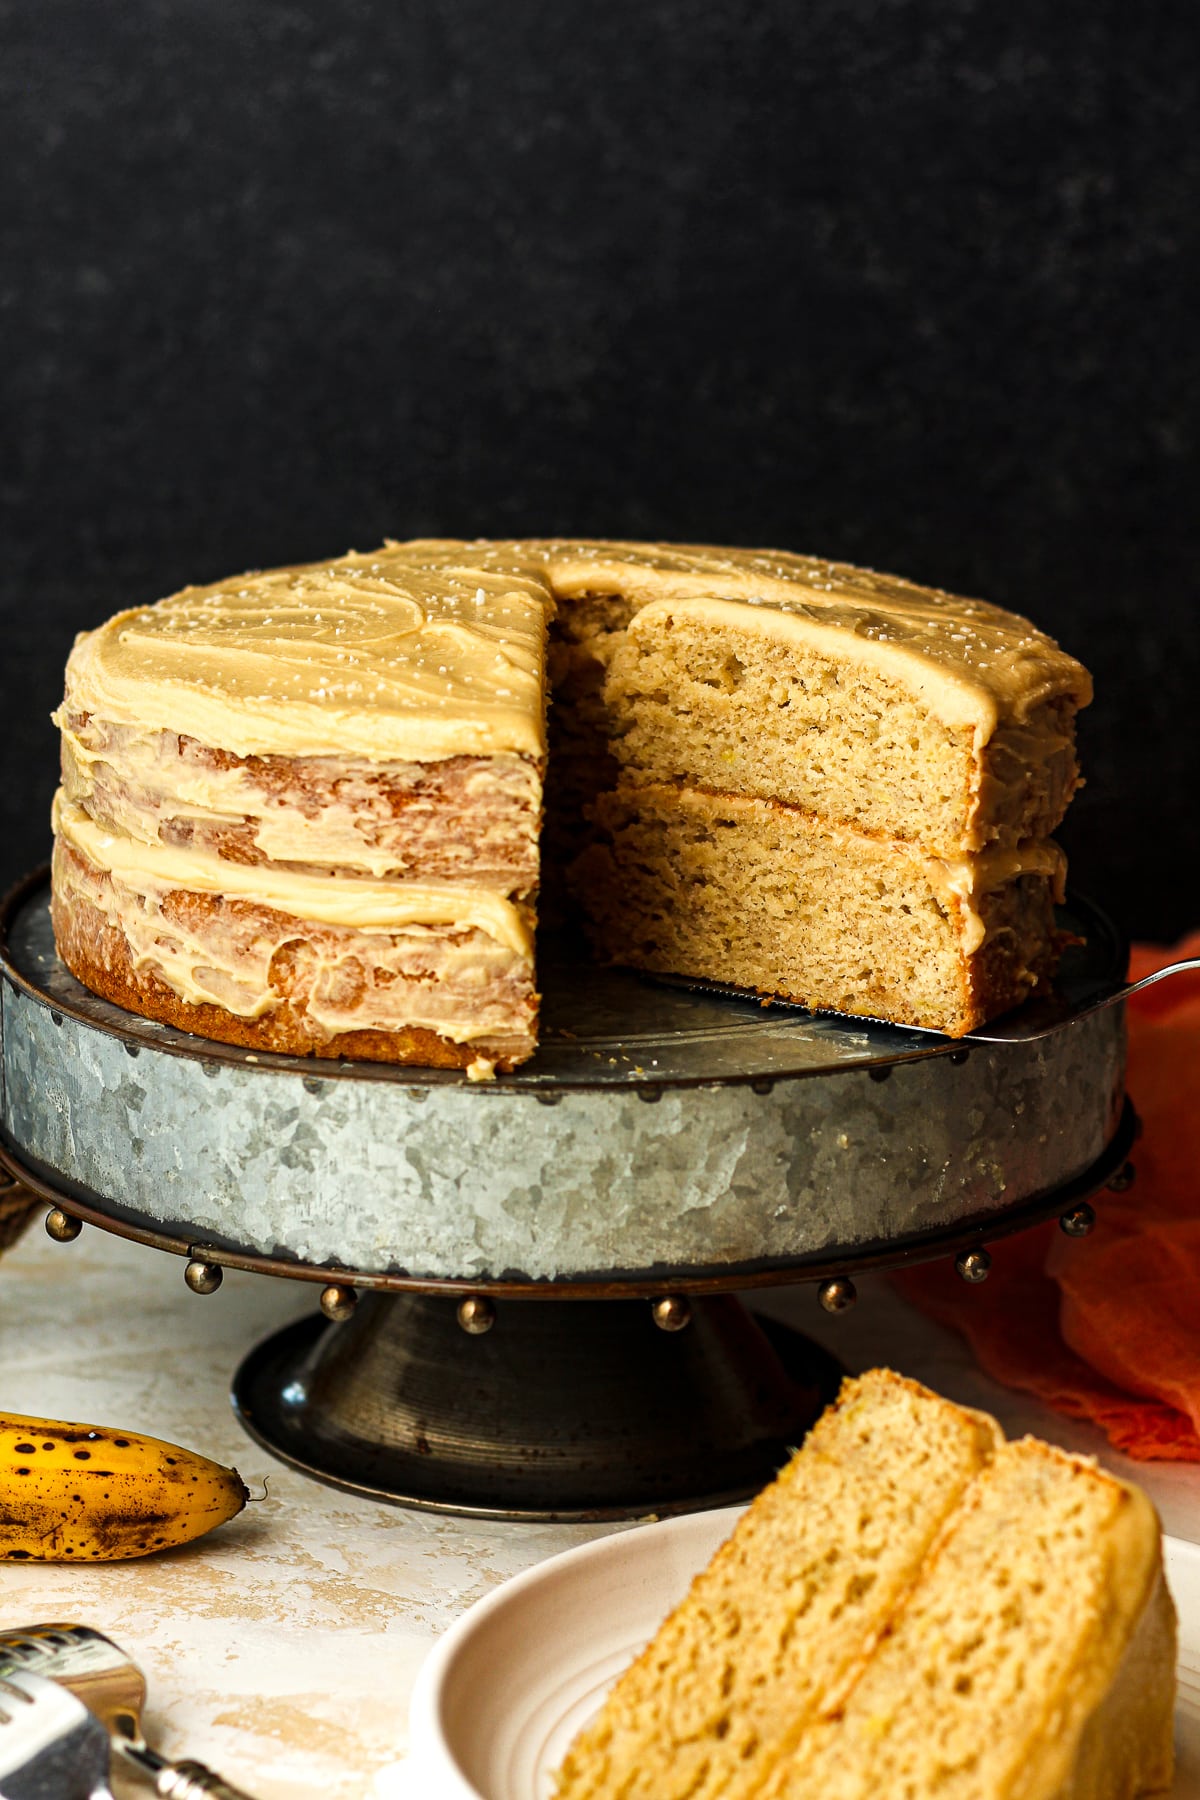 Side view of a naked layered banana cake on a silver cake stand.